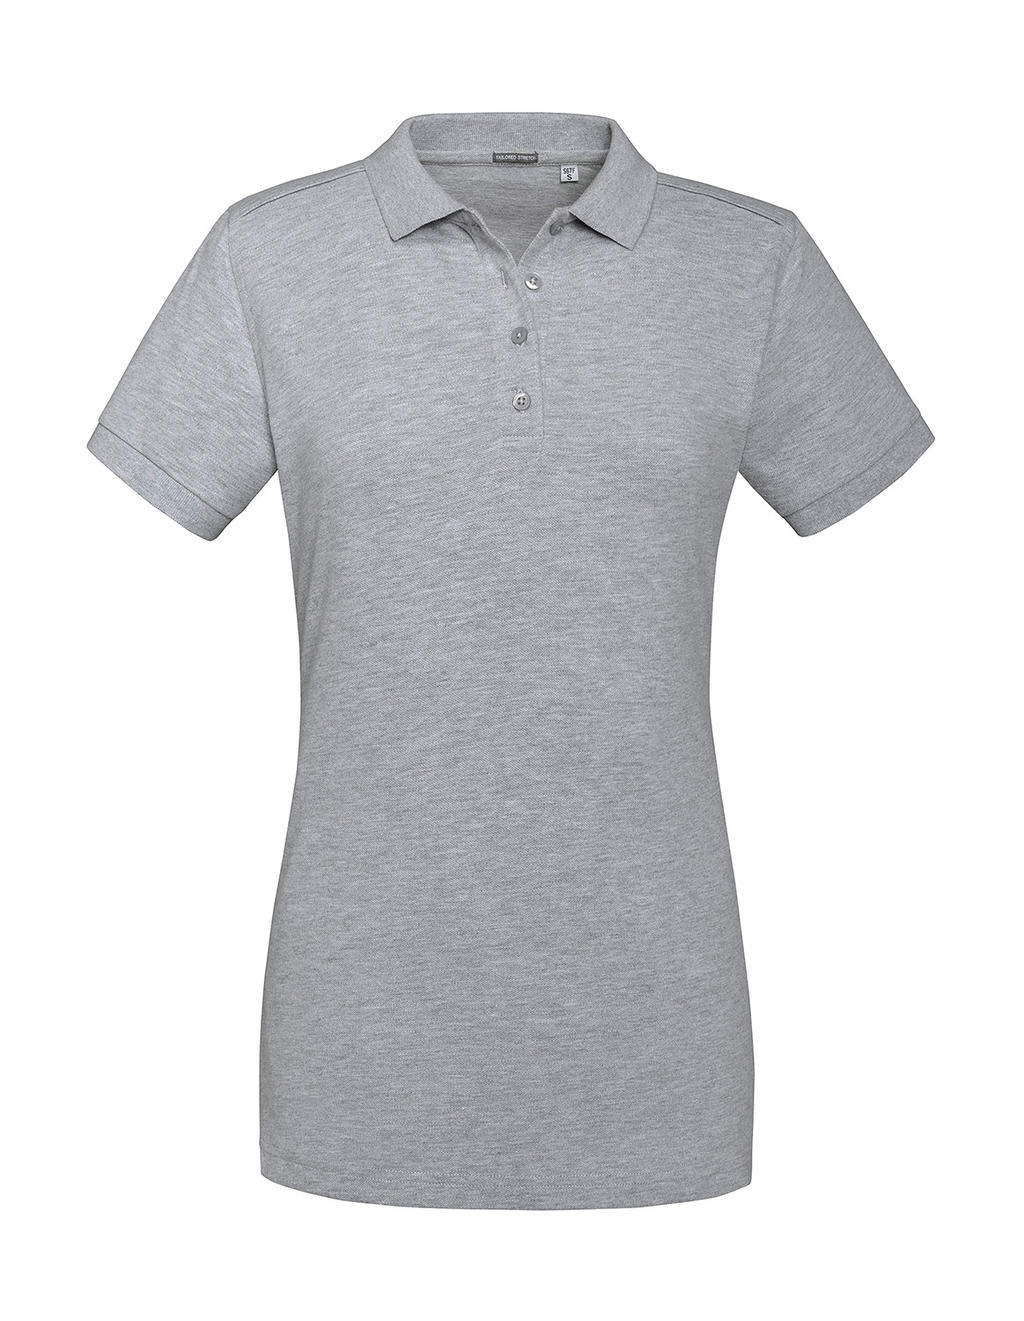  Ladies Tailored Stretch Polo in Farbe Light Oxford